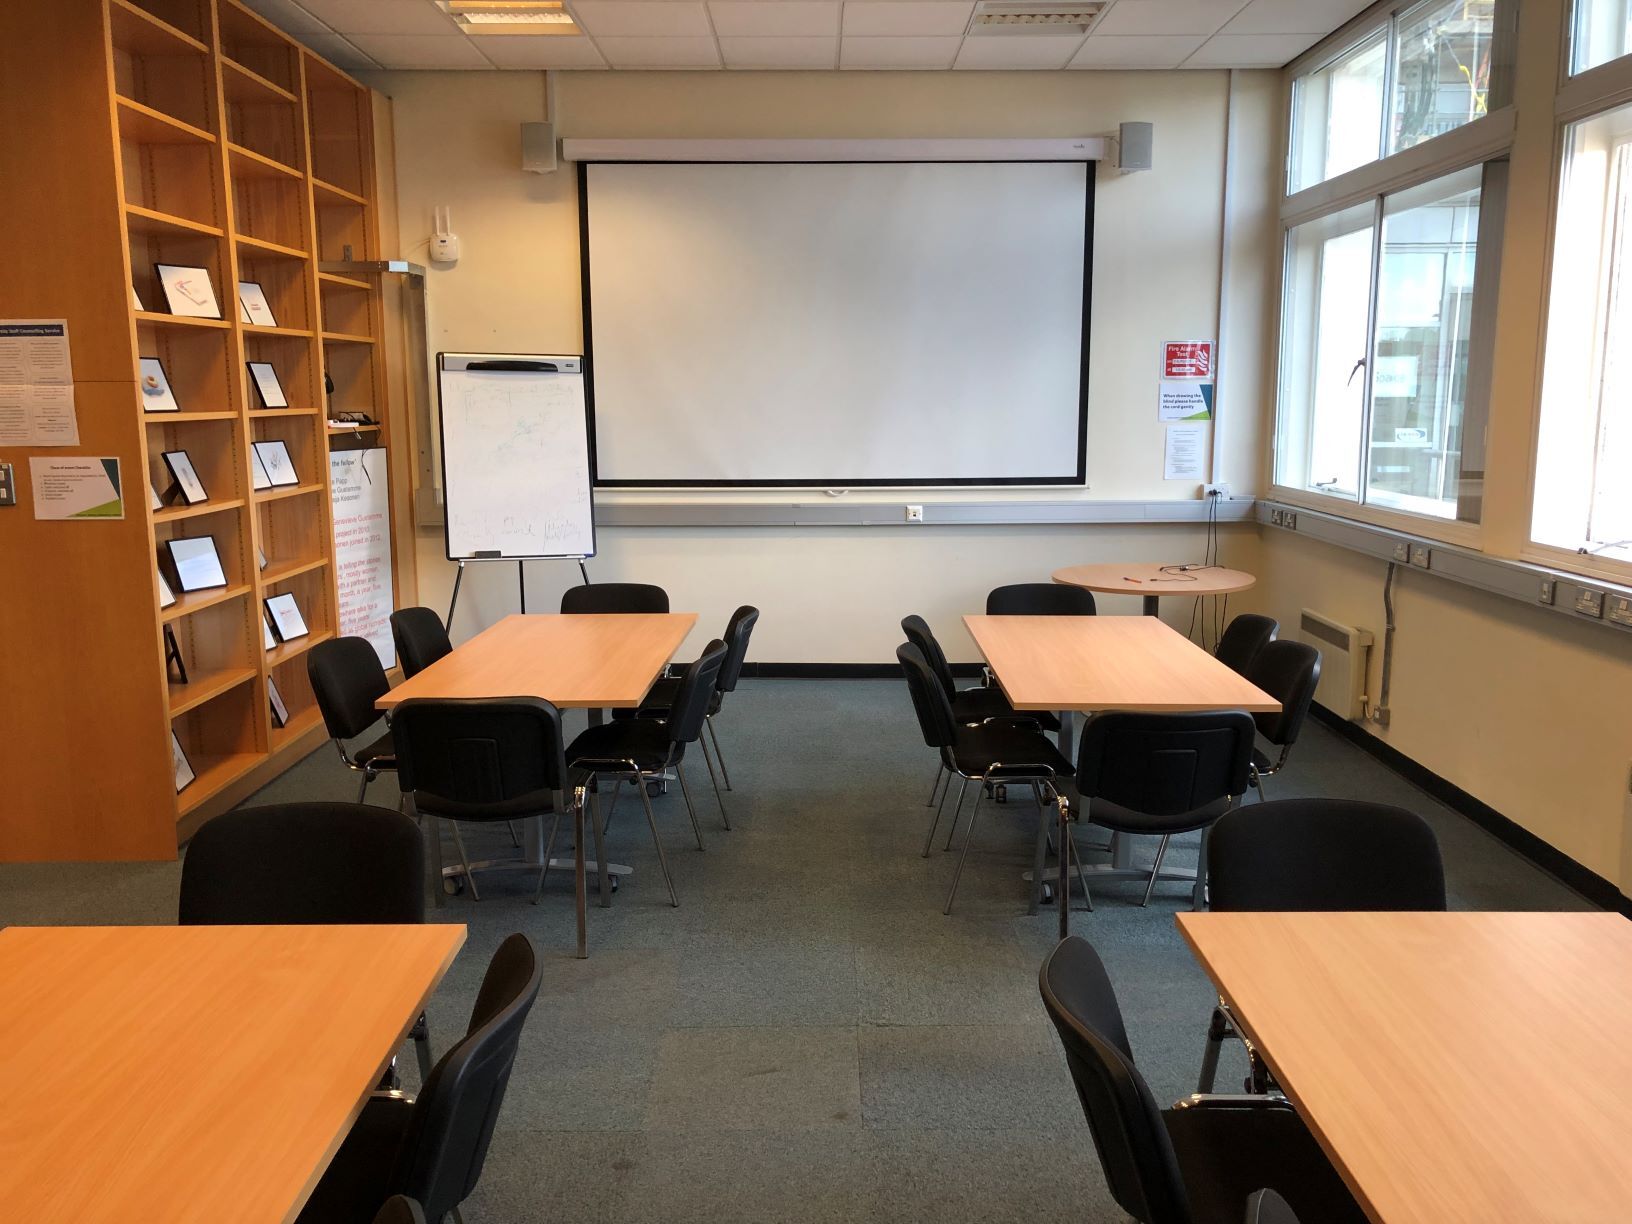 Photograph showing the standard layout of the Newman Library - a room with four rectangular tables, each with six chairs, with a projector screen on the end wall.